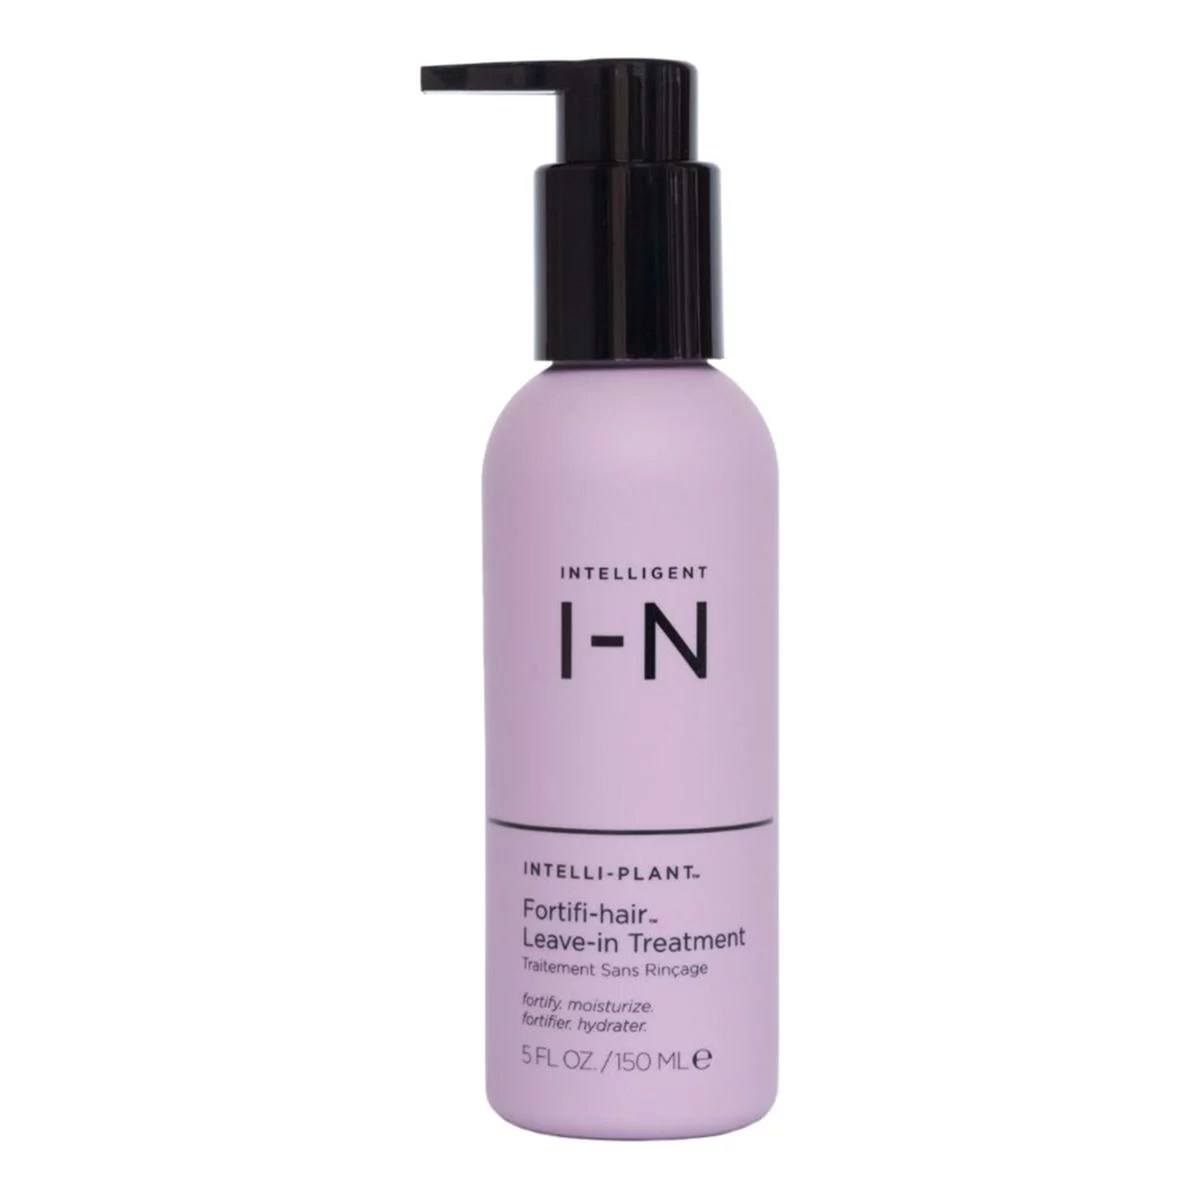 a bottle of intelligent nutrients fortifihair leave in treatment, a streamlined beauty product